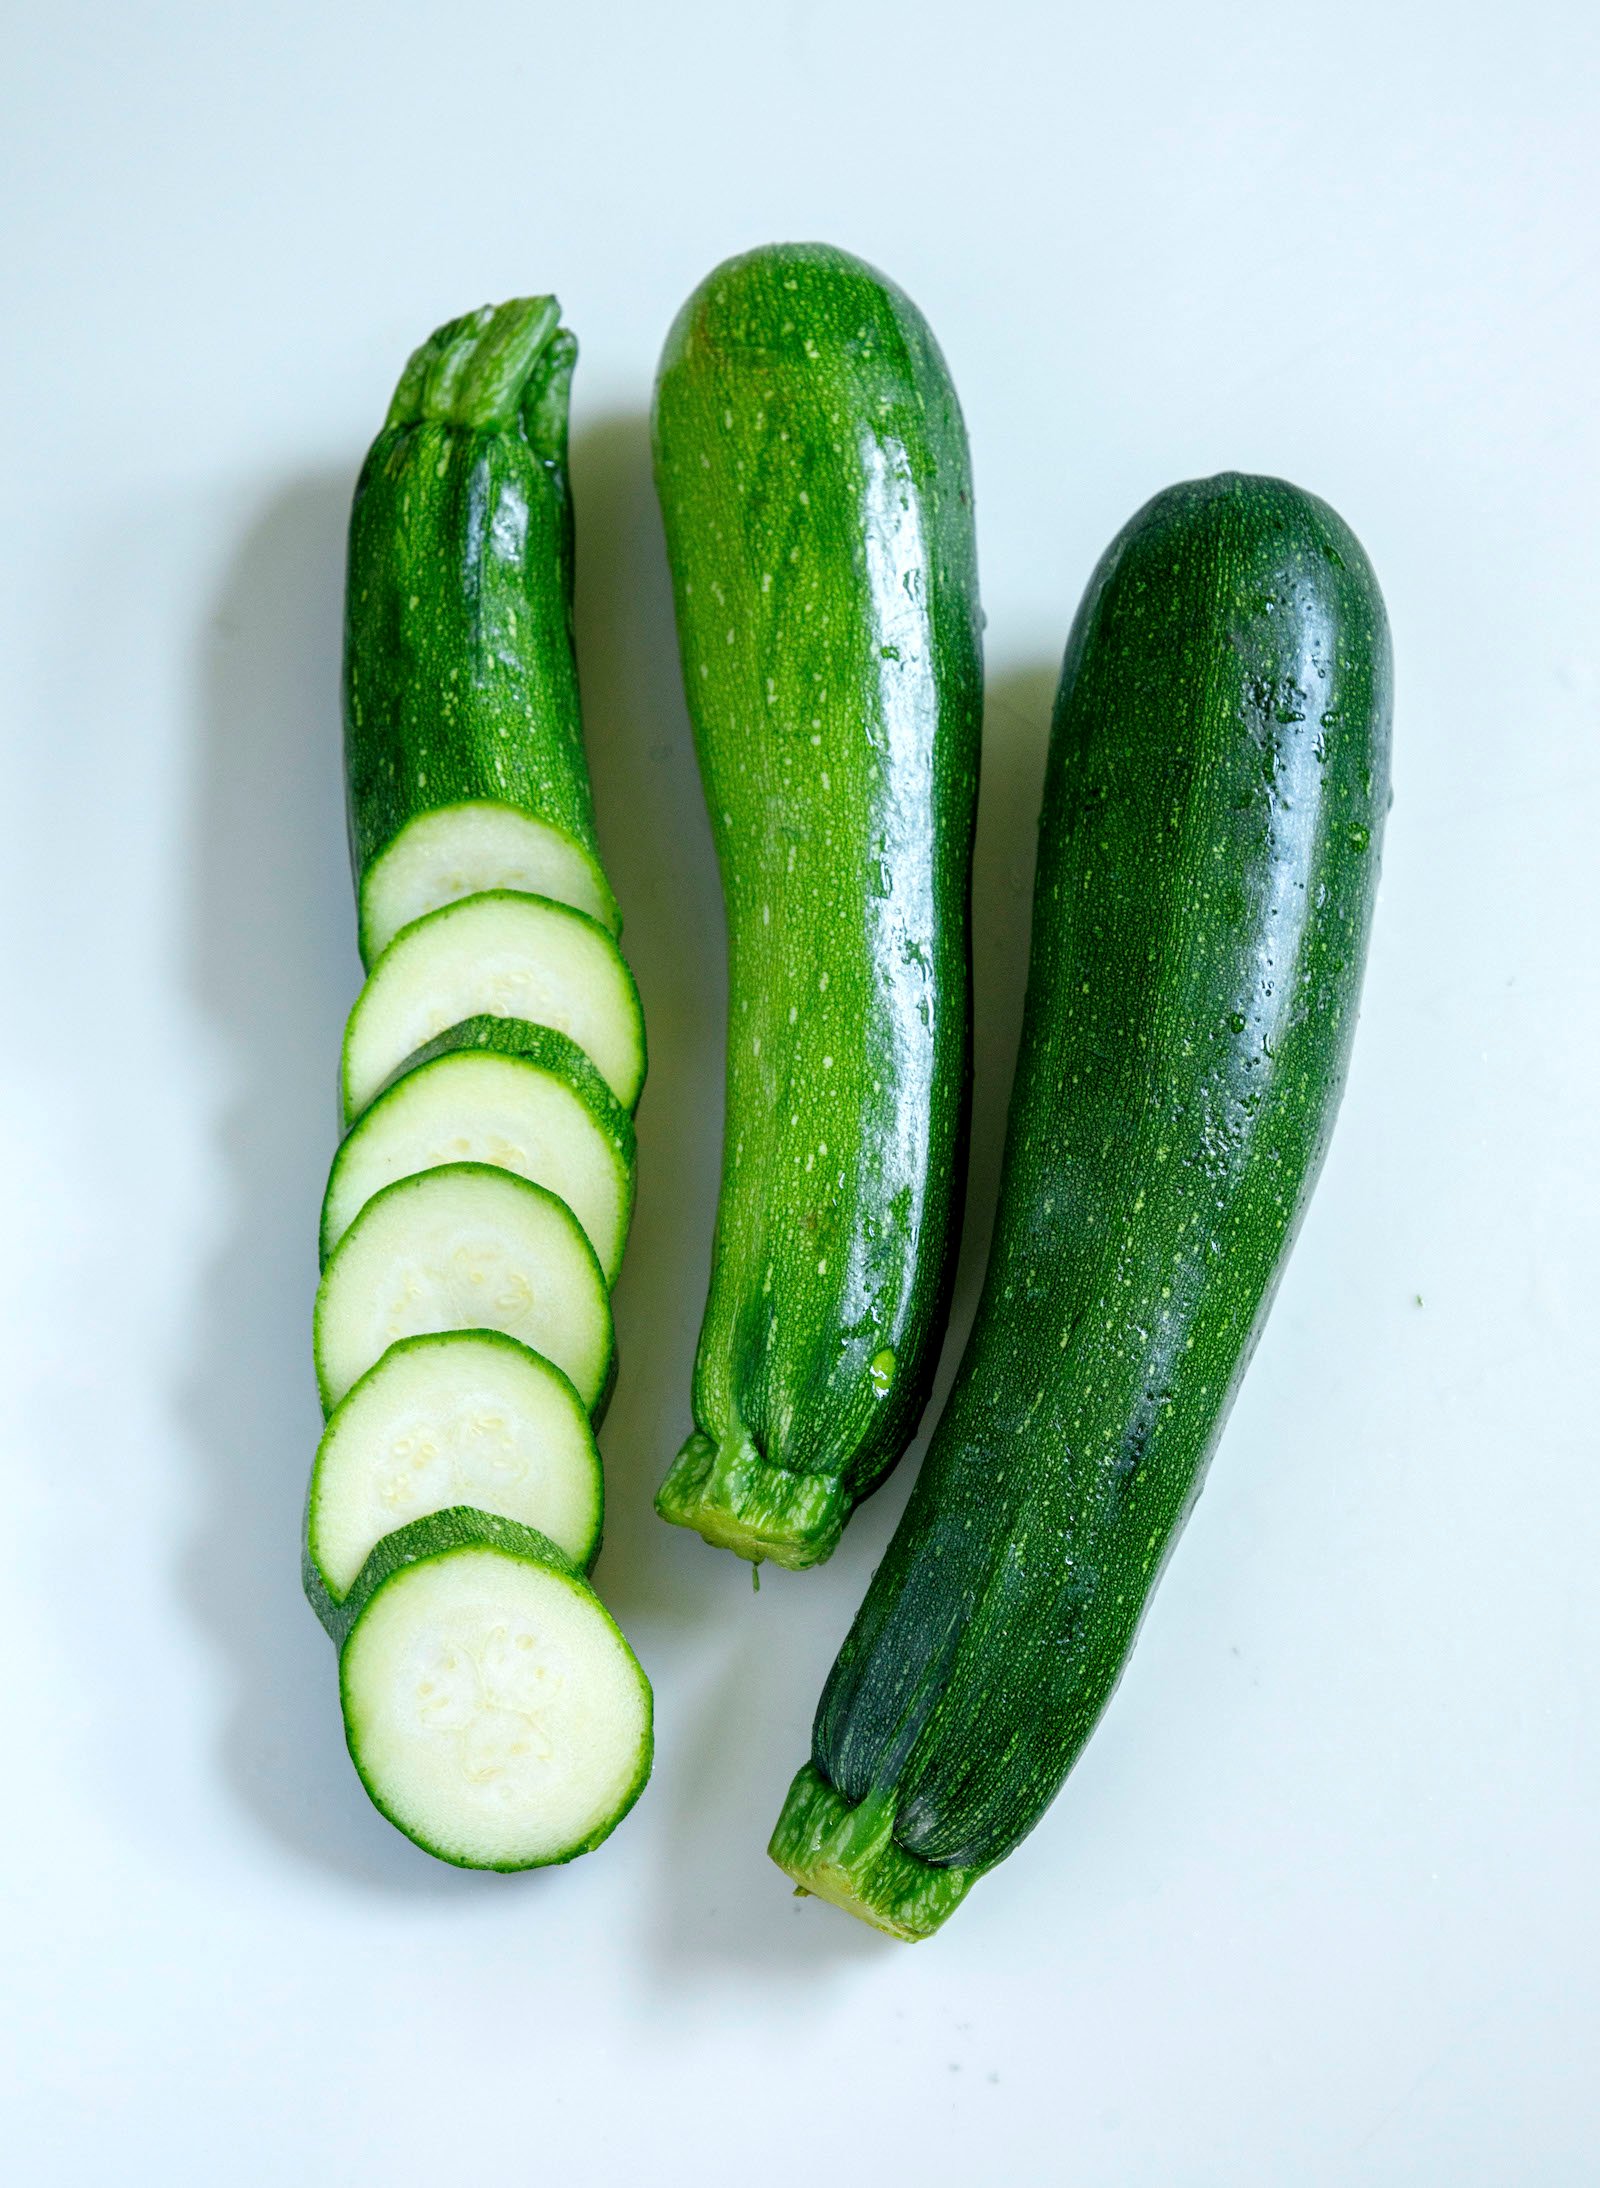 Three zucchini on a white background, one of them is sliced into rounds.